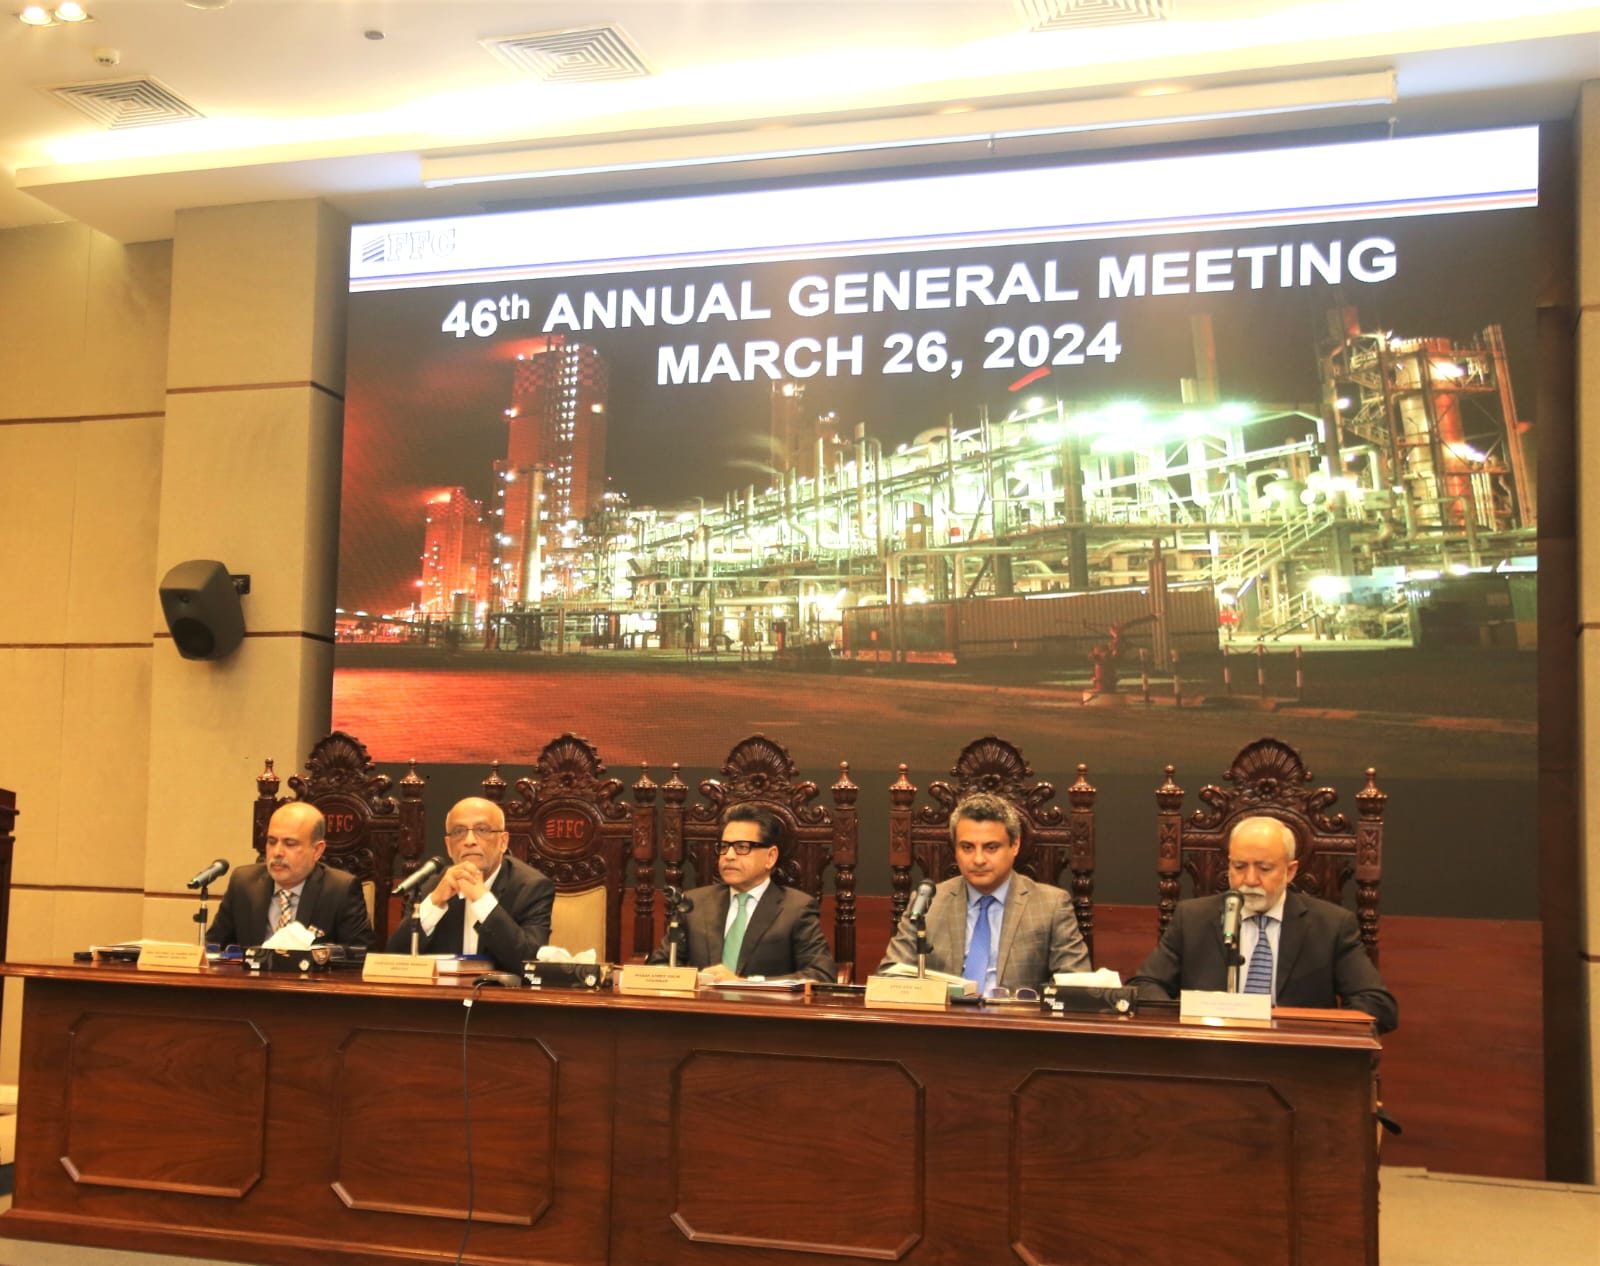 Fauji Fertilizer Company Holds 46th Annual General Meeting